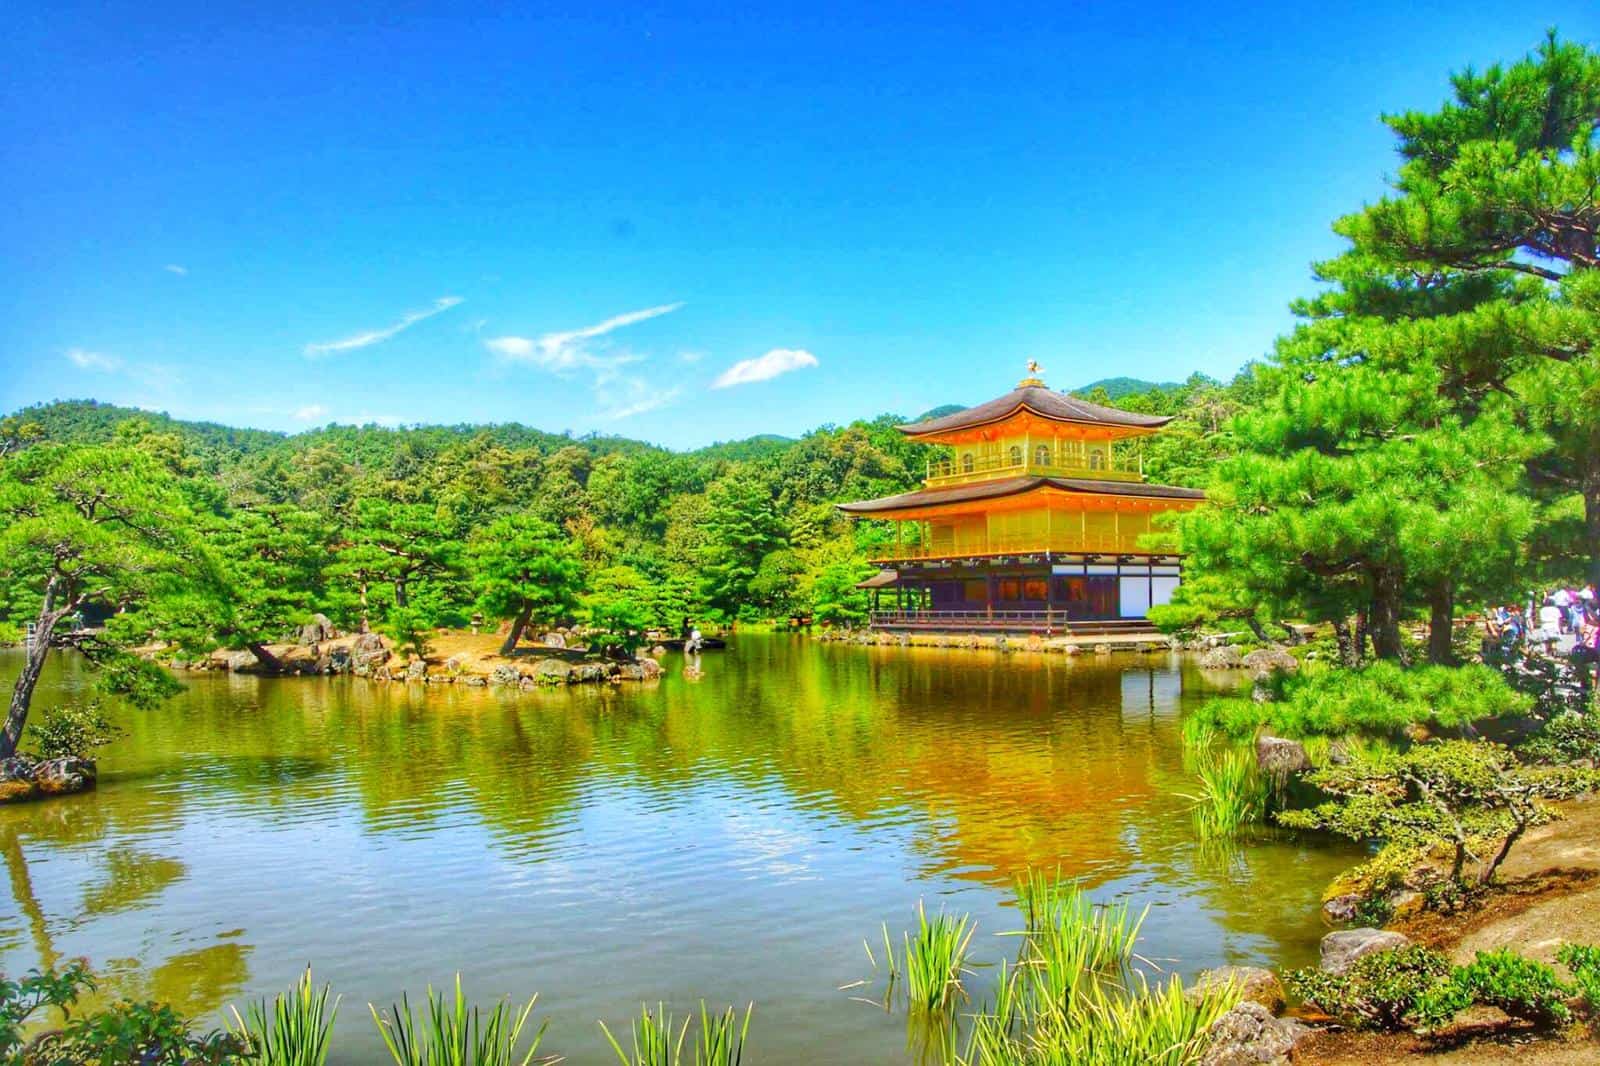 The Golden Pavilion one of the best things in kyoto for kids